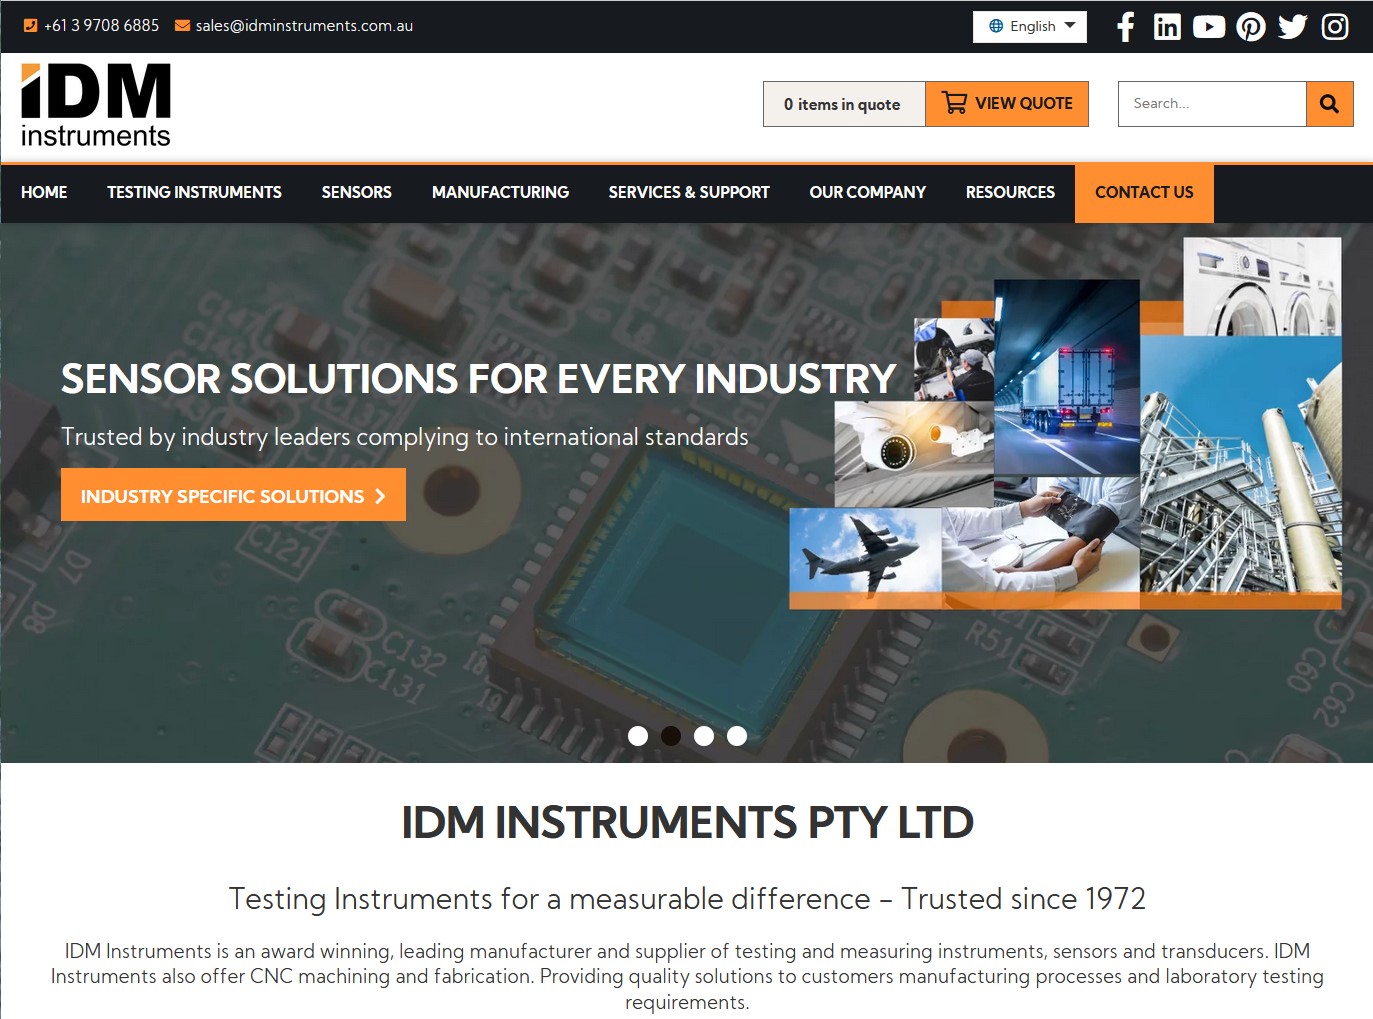 website redesign for Australia's leading manufacturer and supplier of testing and measuring instrument